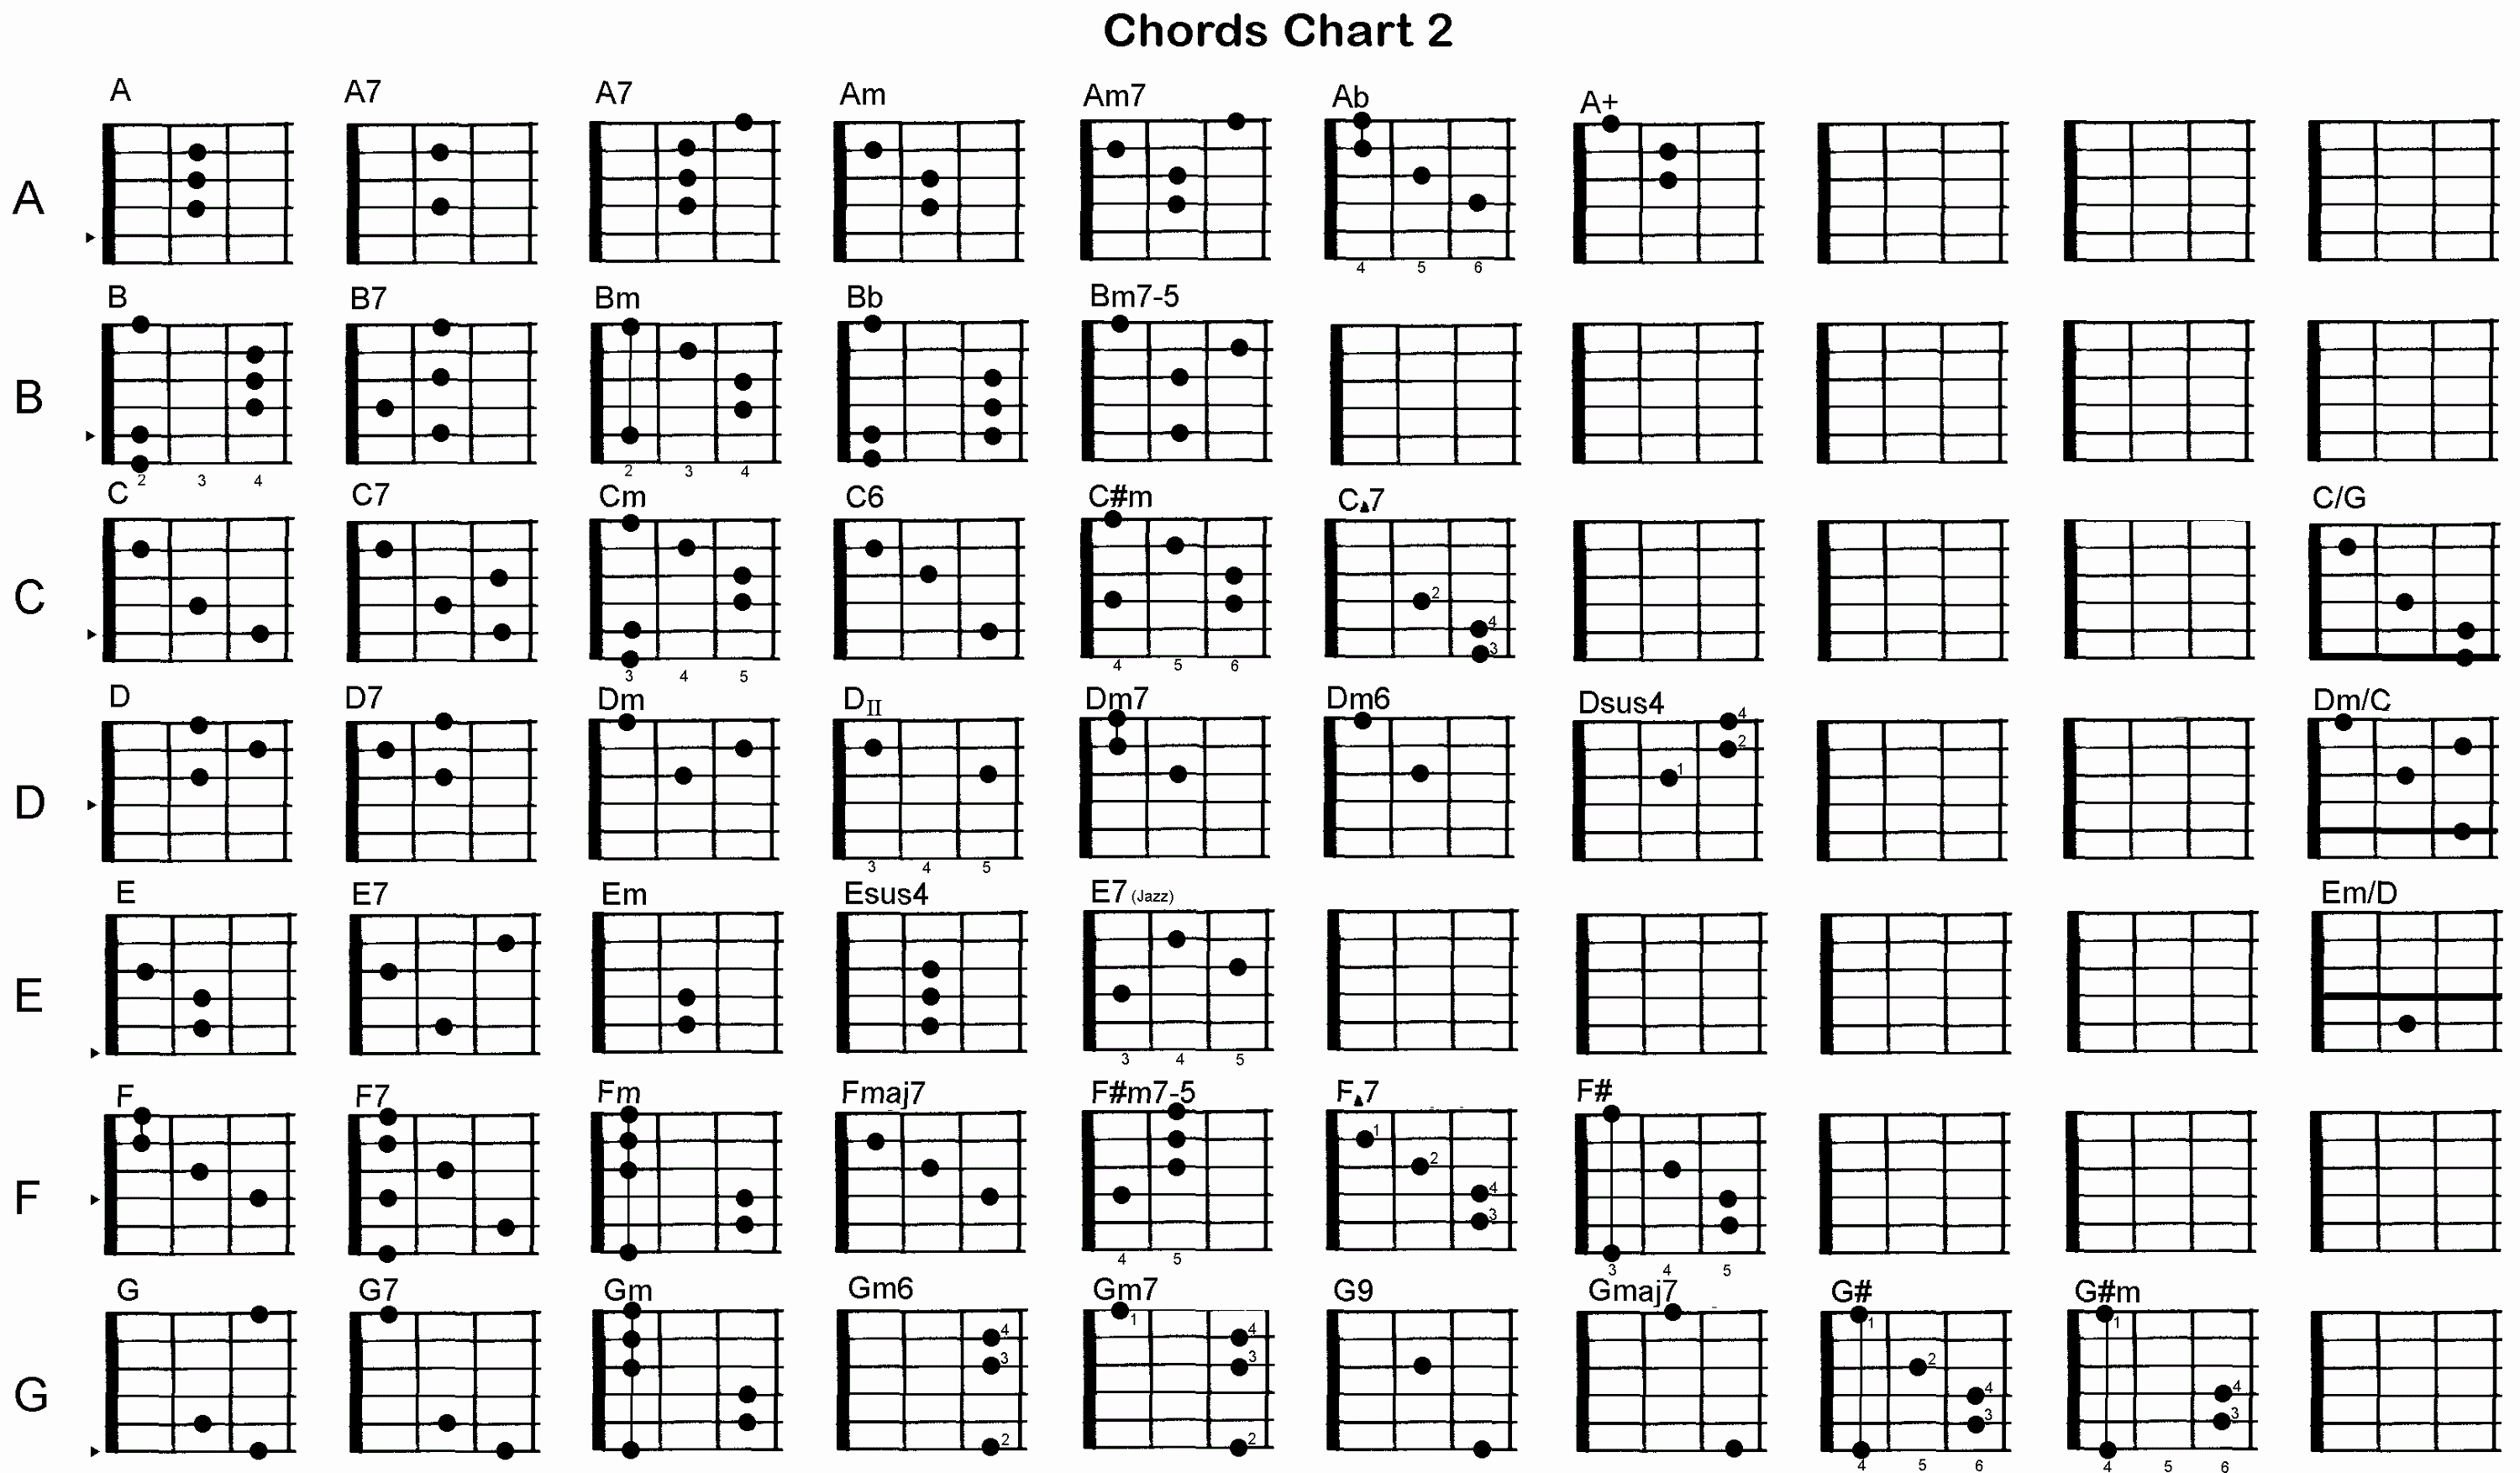 Complete Guitar Chord Charts Inspirational Guitar Cjords Charts Printable